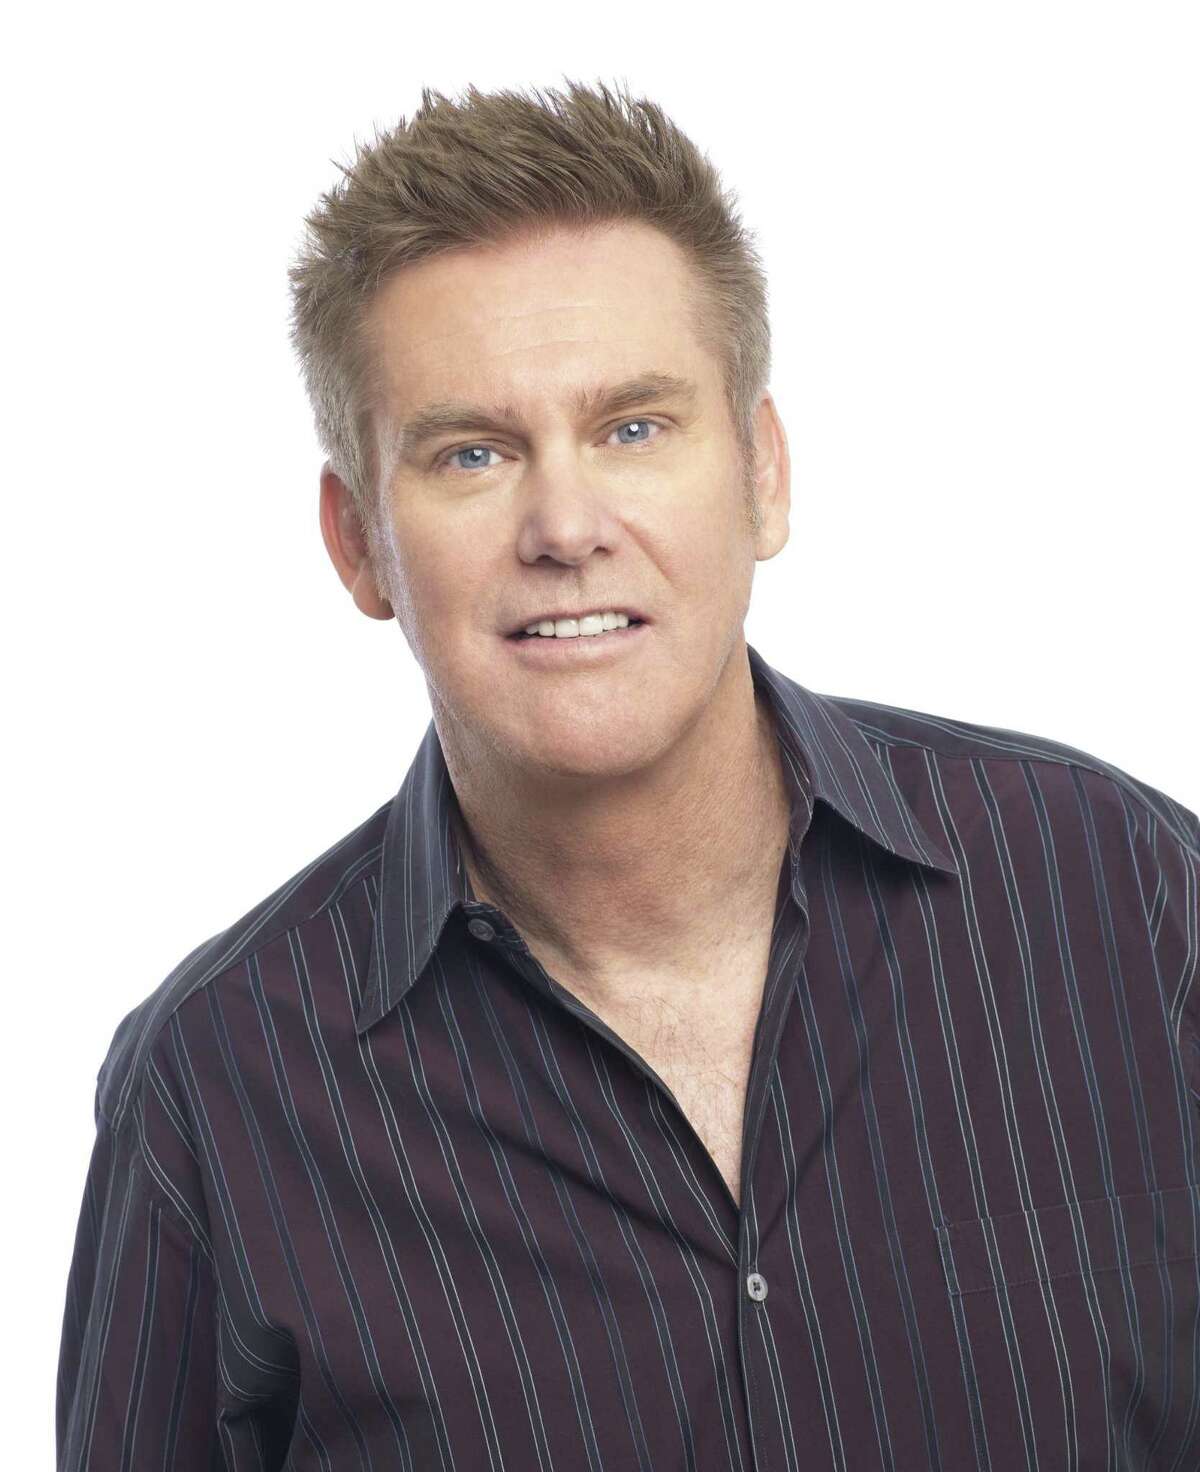 Brian Regan performs his comedy act at the Warner Theatre on Thursday night.